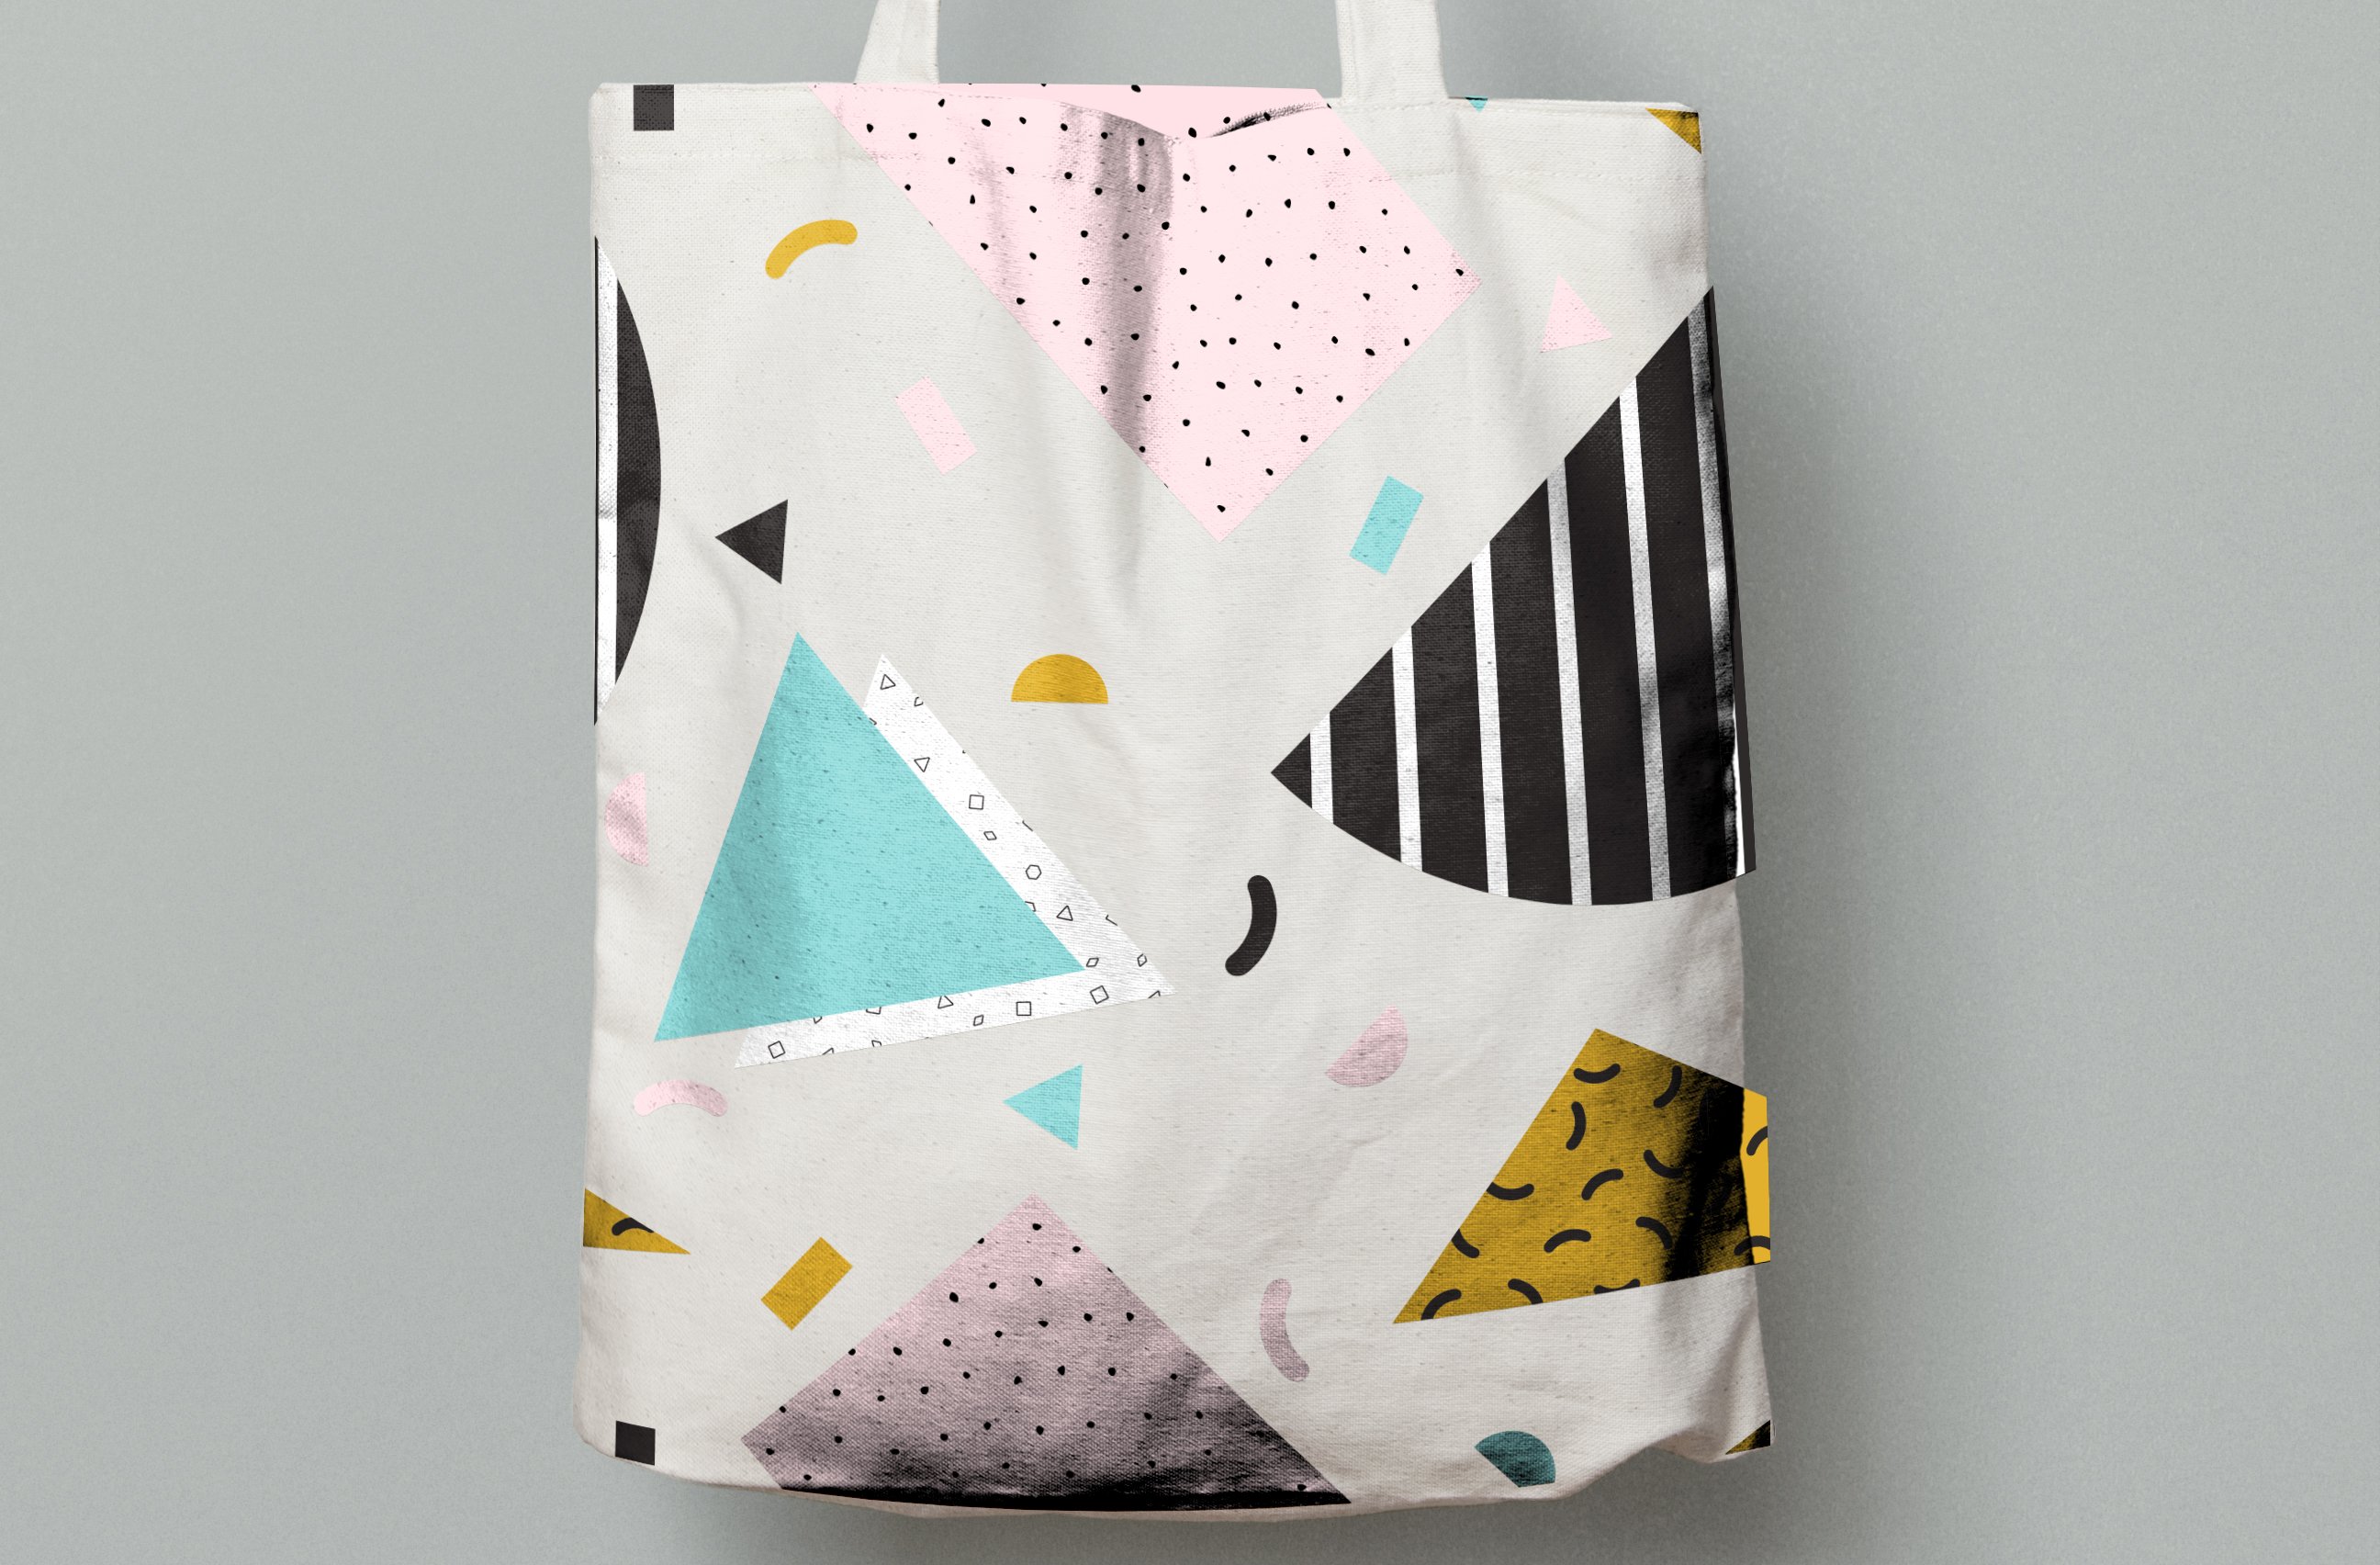 Big eco bag with laconic and colorful geometric shapes.